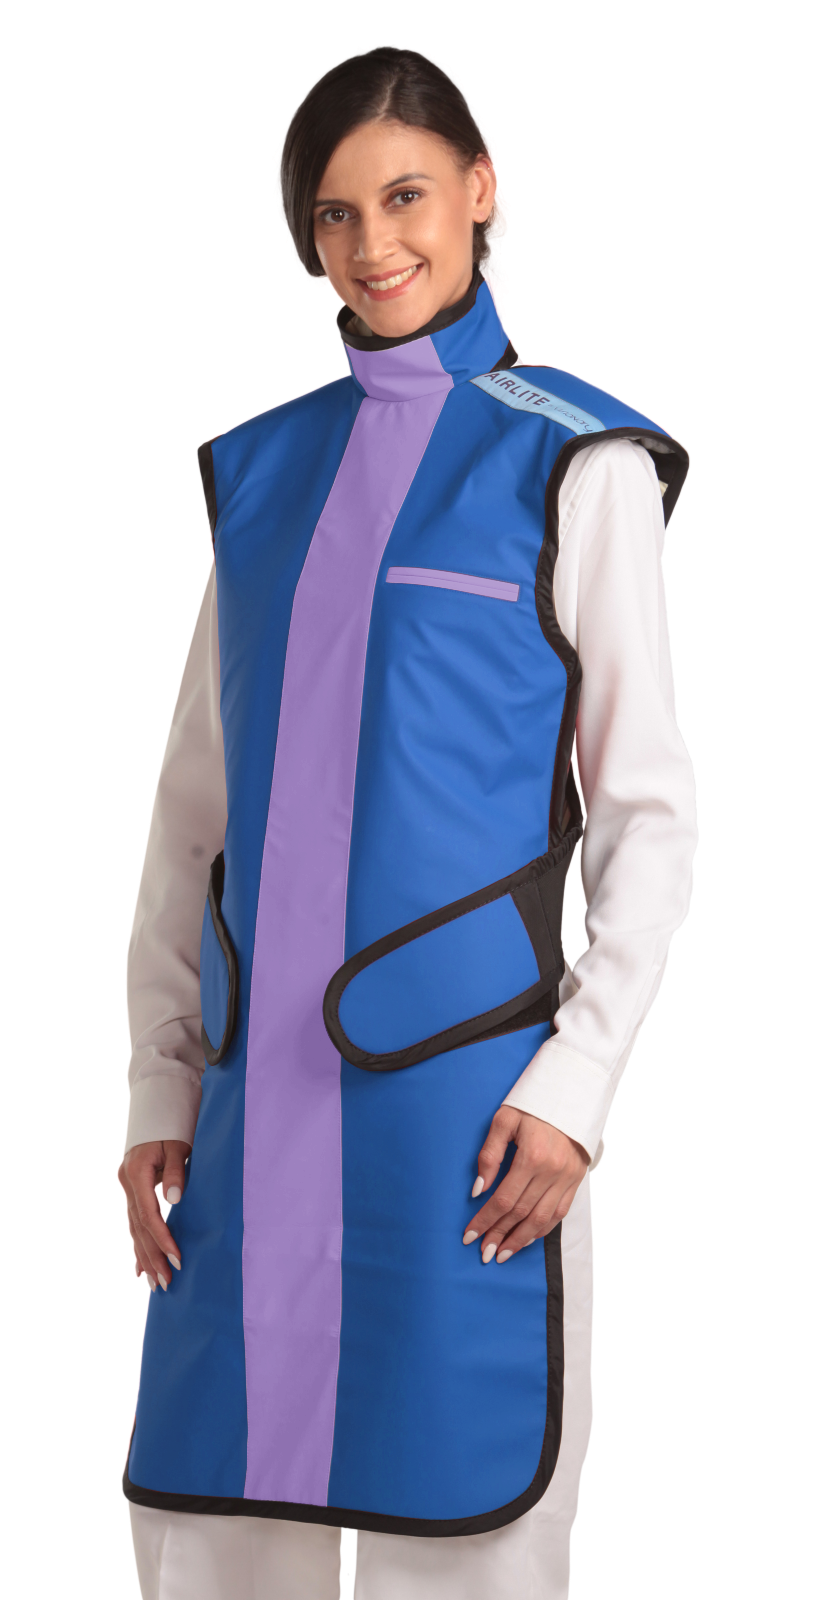 Frontal left-side view of a female model wearing a coat apron with an integrated thyroid guard. The apron is electric blue in color with a lilac center line and has velcro fasteners by the sides.